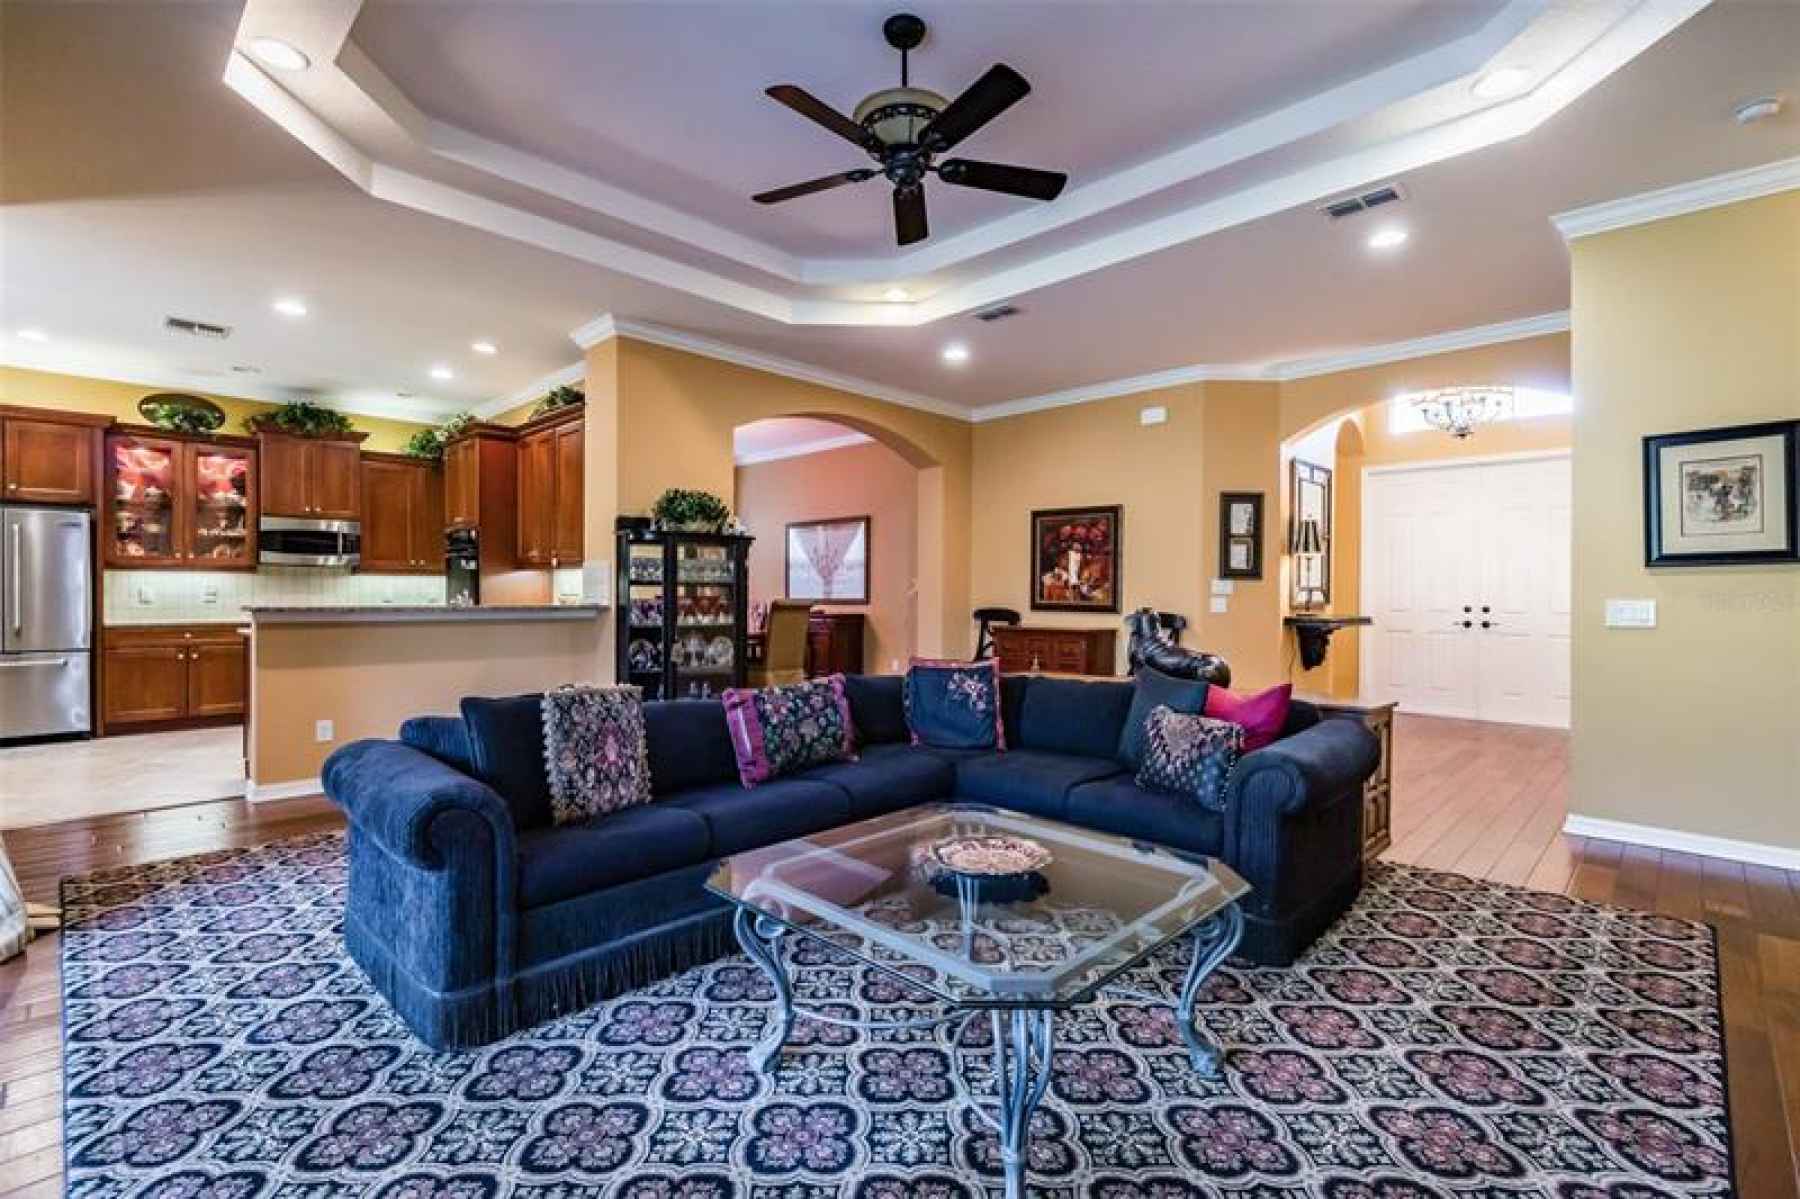 Great Room features a double Tray ceiling.